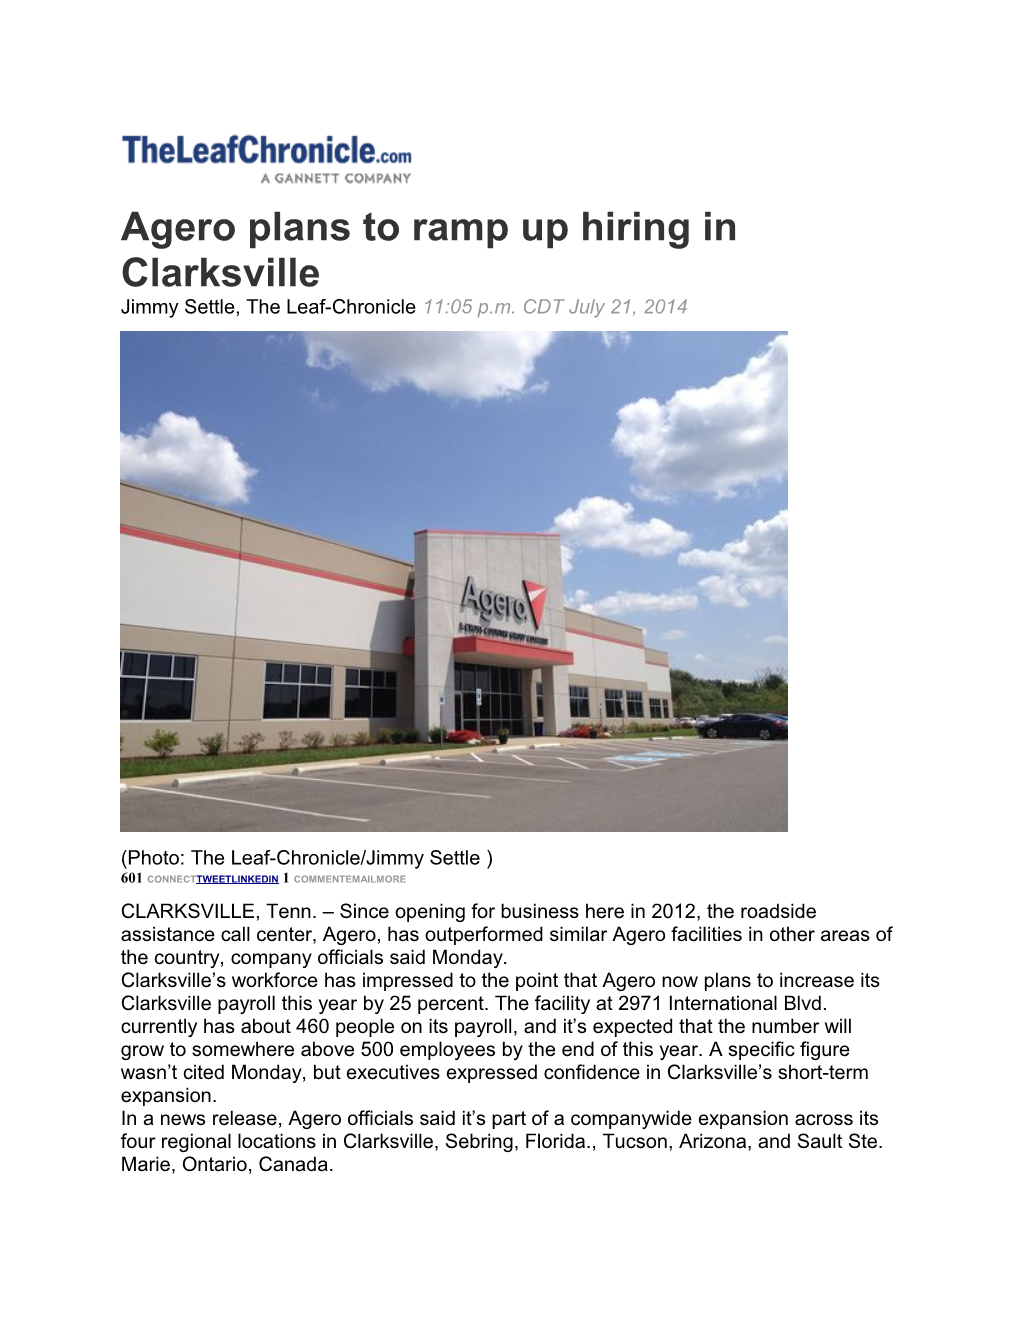 Agero Plans to Ramp up Hiring in Clarksville